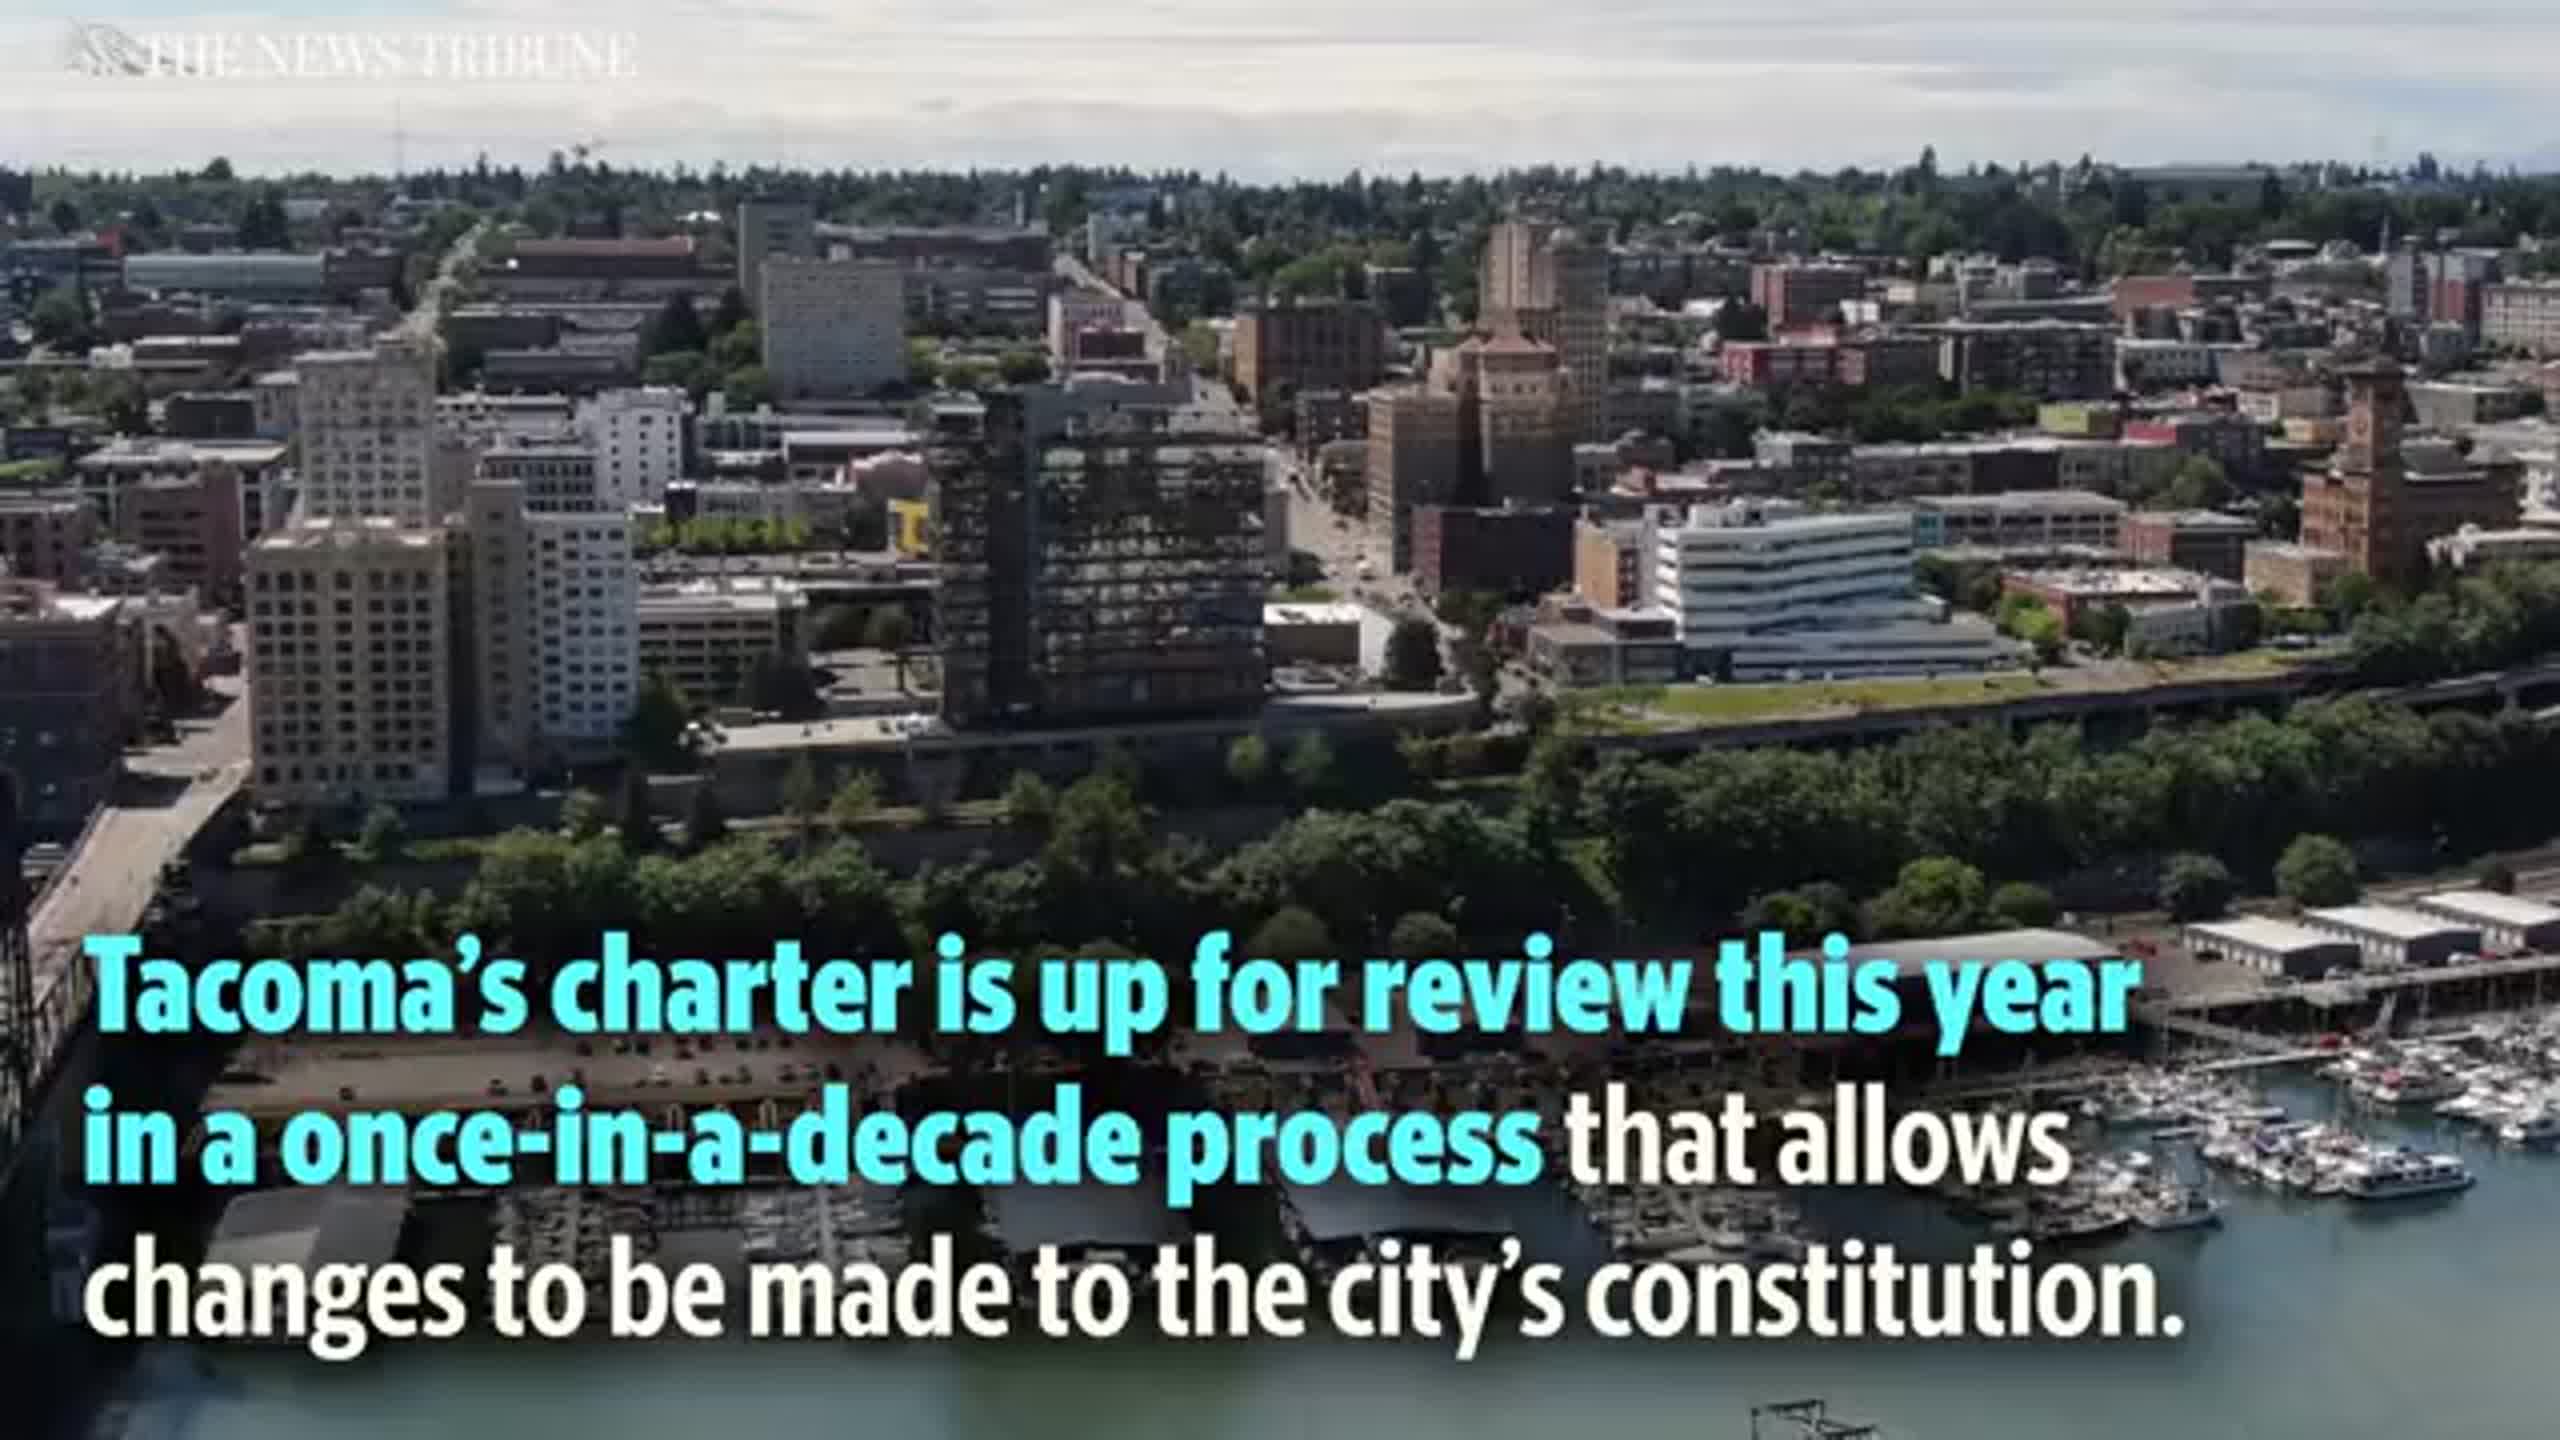 Seismic shake-up at City Hall? Tacoma’s form of government could shift under proposal